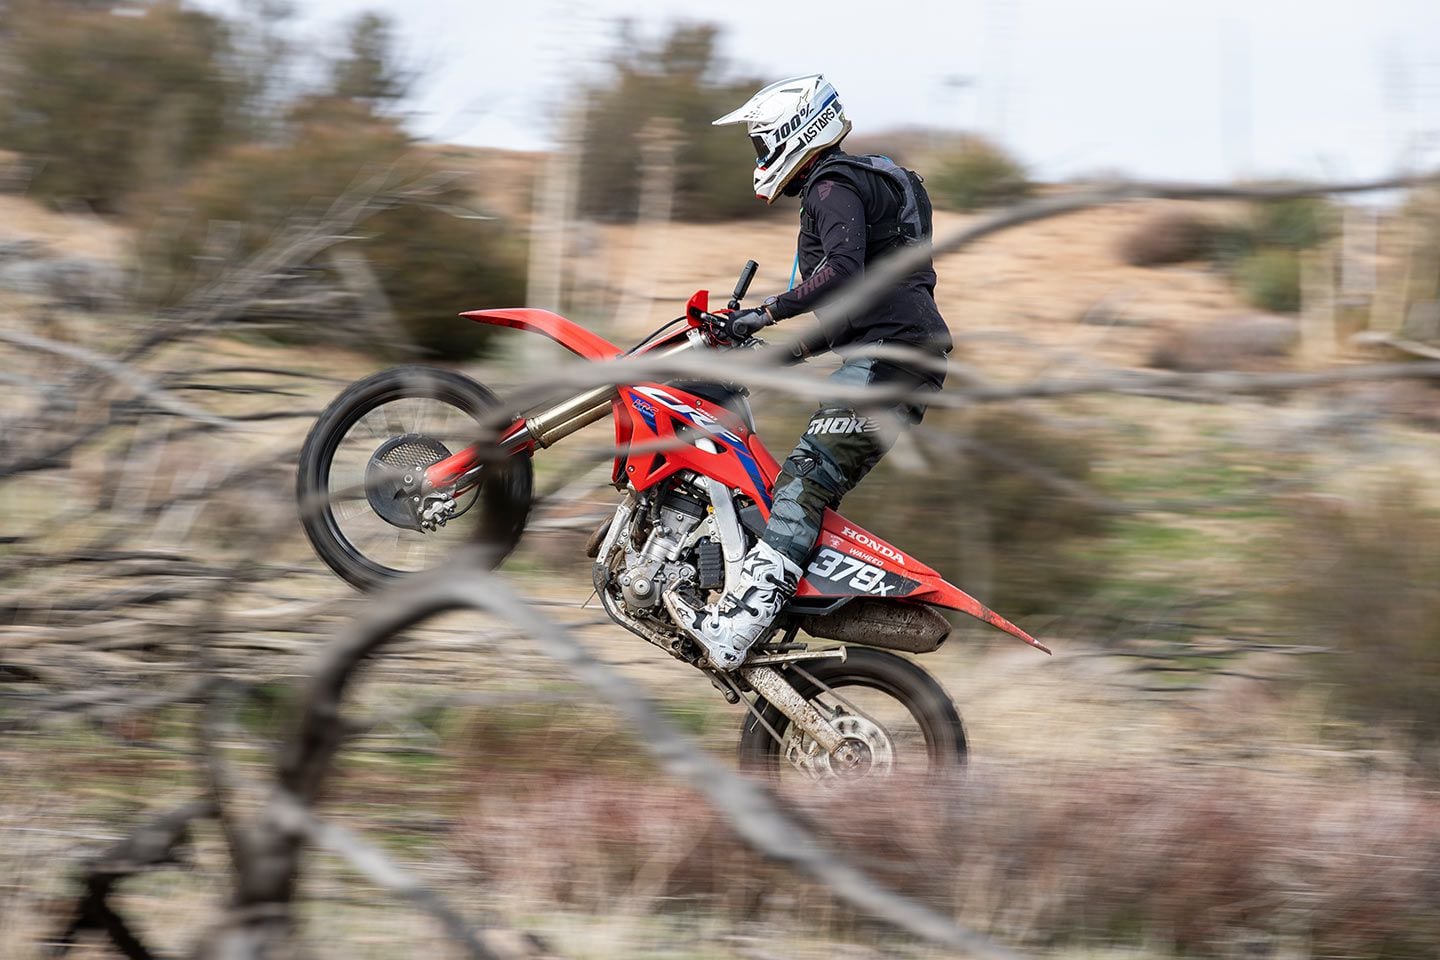 Off-road riders and racers seeking a friendly dirt bike that is capable both on the track and trail will value what the CRF250RX offers.